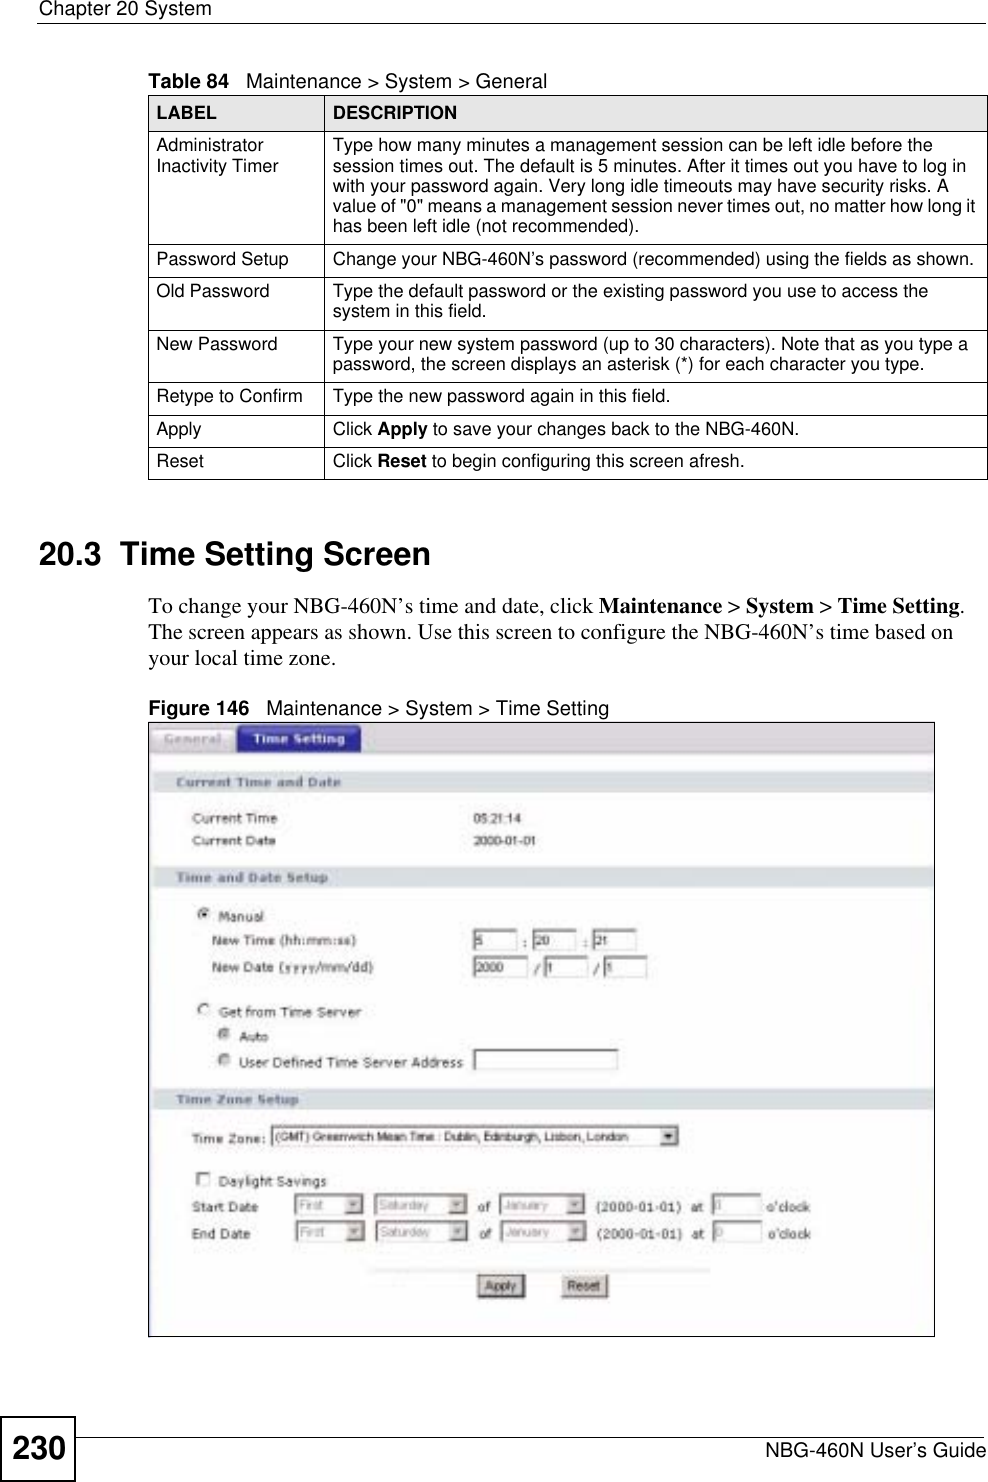 Chapter 20 SystemNBG-460N User’s Guide23020.3  Time Setting ScreenTo change your NBG-460N’s time and date, click Maintenance &gt; System &gt; Time Setting.The screen appears as shown. Use this screen to configure the NBG-460N’s time based on your local time zone.Figure 146   Maintenance &gt; System &gt; Time Setting Administrator Inactivity Timer Type how many minutes a management session can be left idle before the session times out. The default is 5 minutes. After it times out you have to log in with your password again. Very long idle timeouts may have security risks. A value of &quot;0&quot; means a management session never times out, no matter how long it has been left idle (not recommended).Password Setup Change your NBG-460N’s password (recommended) using the fields as shown.Old Password Type the default password or the existing password you use to access the system in this field.New Password Type your new system password (up to 30 characters). Note that as you type a password, the screen displays an asterisk (*) for each character you type.Retype to Confirm Type the new password again in this field.Apply Click Apply to save your changes back to the NBG-460N.Reset Click Reset to begin configuring this screen afresh.Table 84   Maintenance &gt; System &gt; GeneralLABEL DESCRIPTION